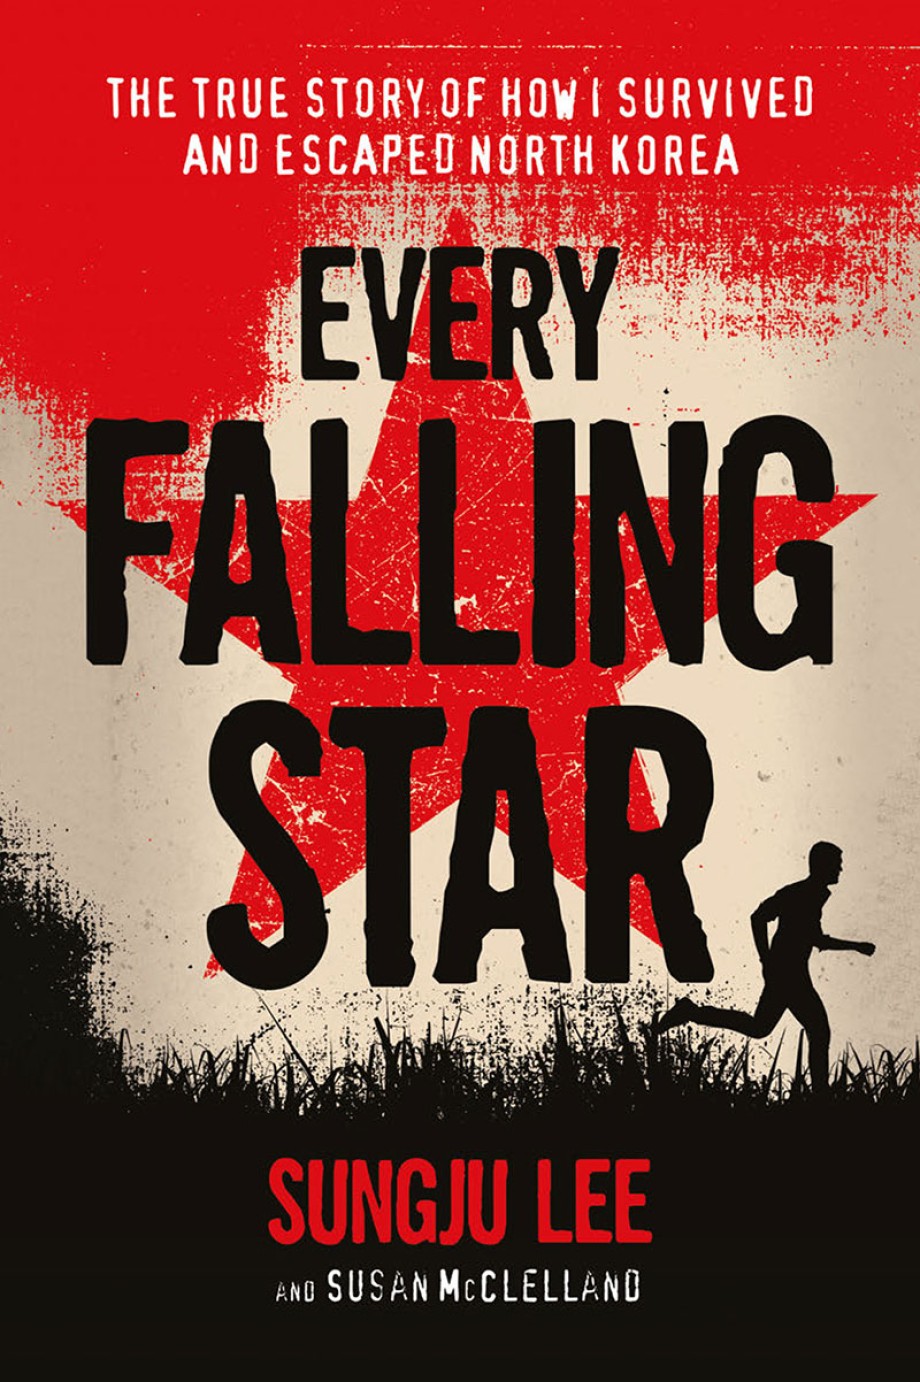 Every Falling Star The True Story of How I Survived and Escaped North Korea